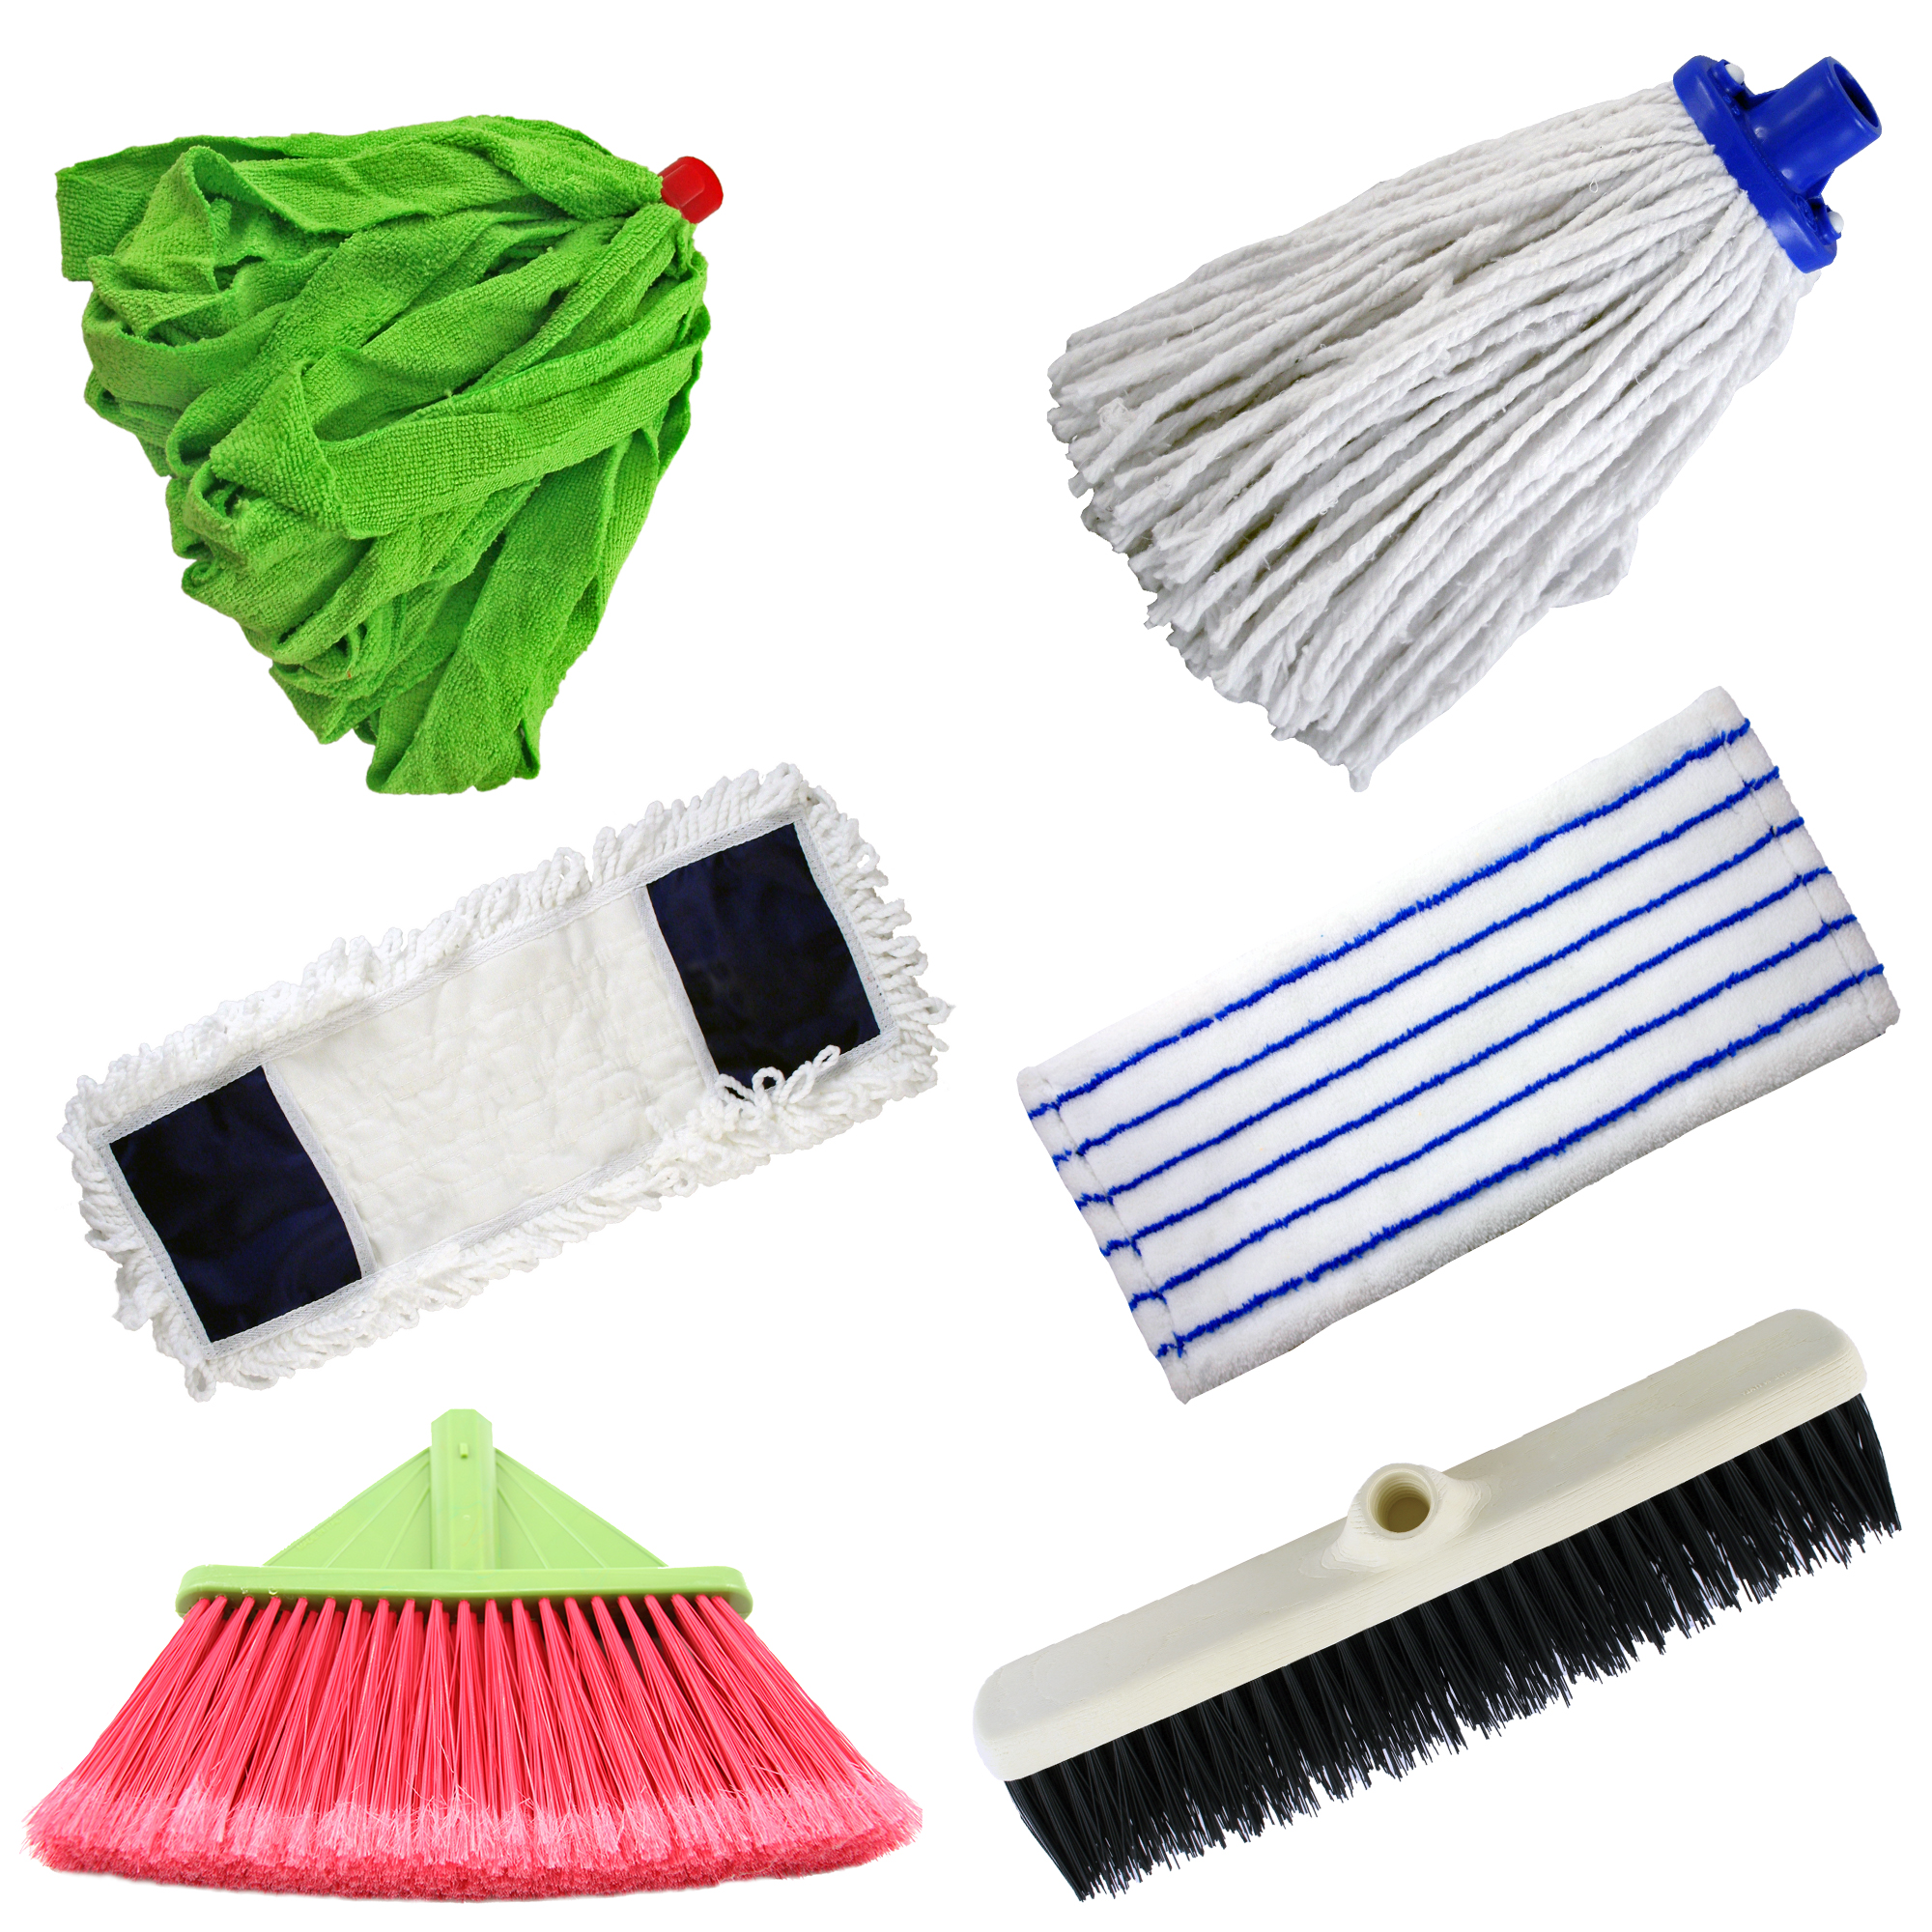 Default Category International/Cleaning and Housekeeping/BROOMS, MOPS, DUST PANS, BRUSHES